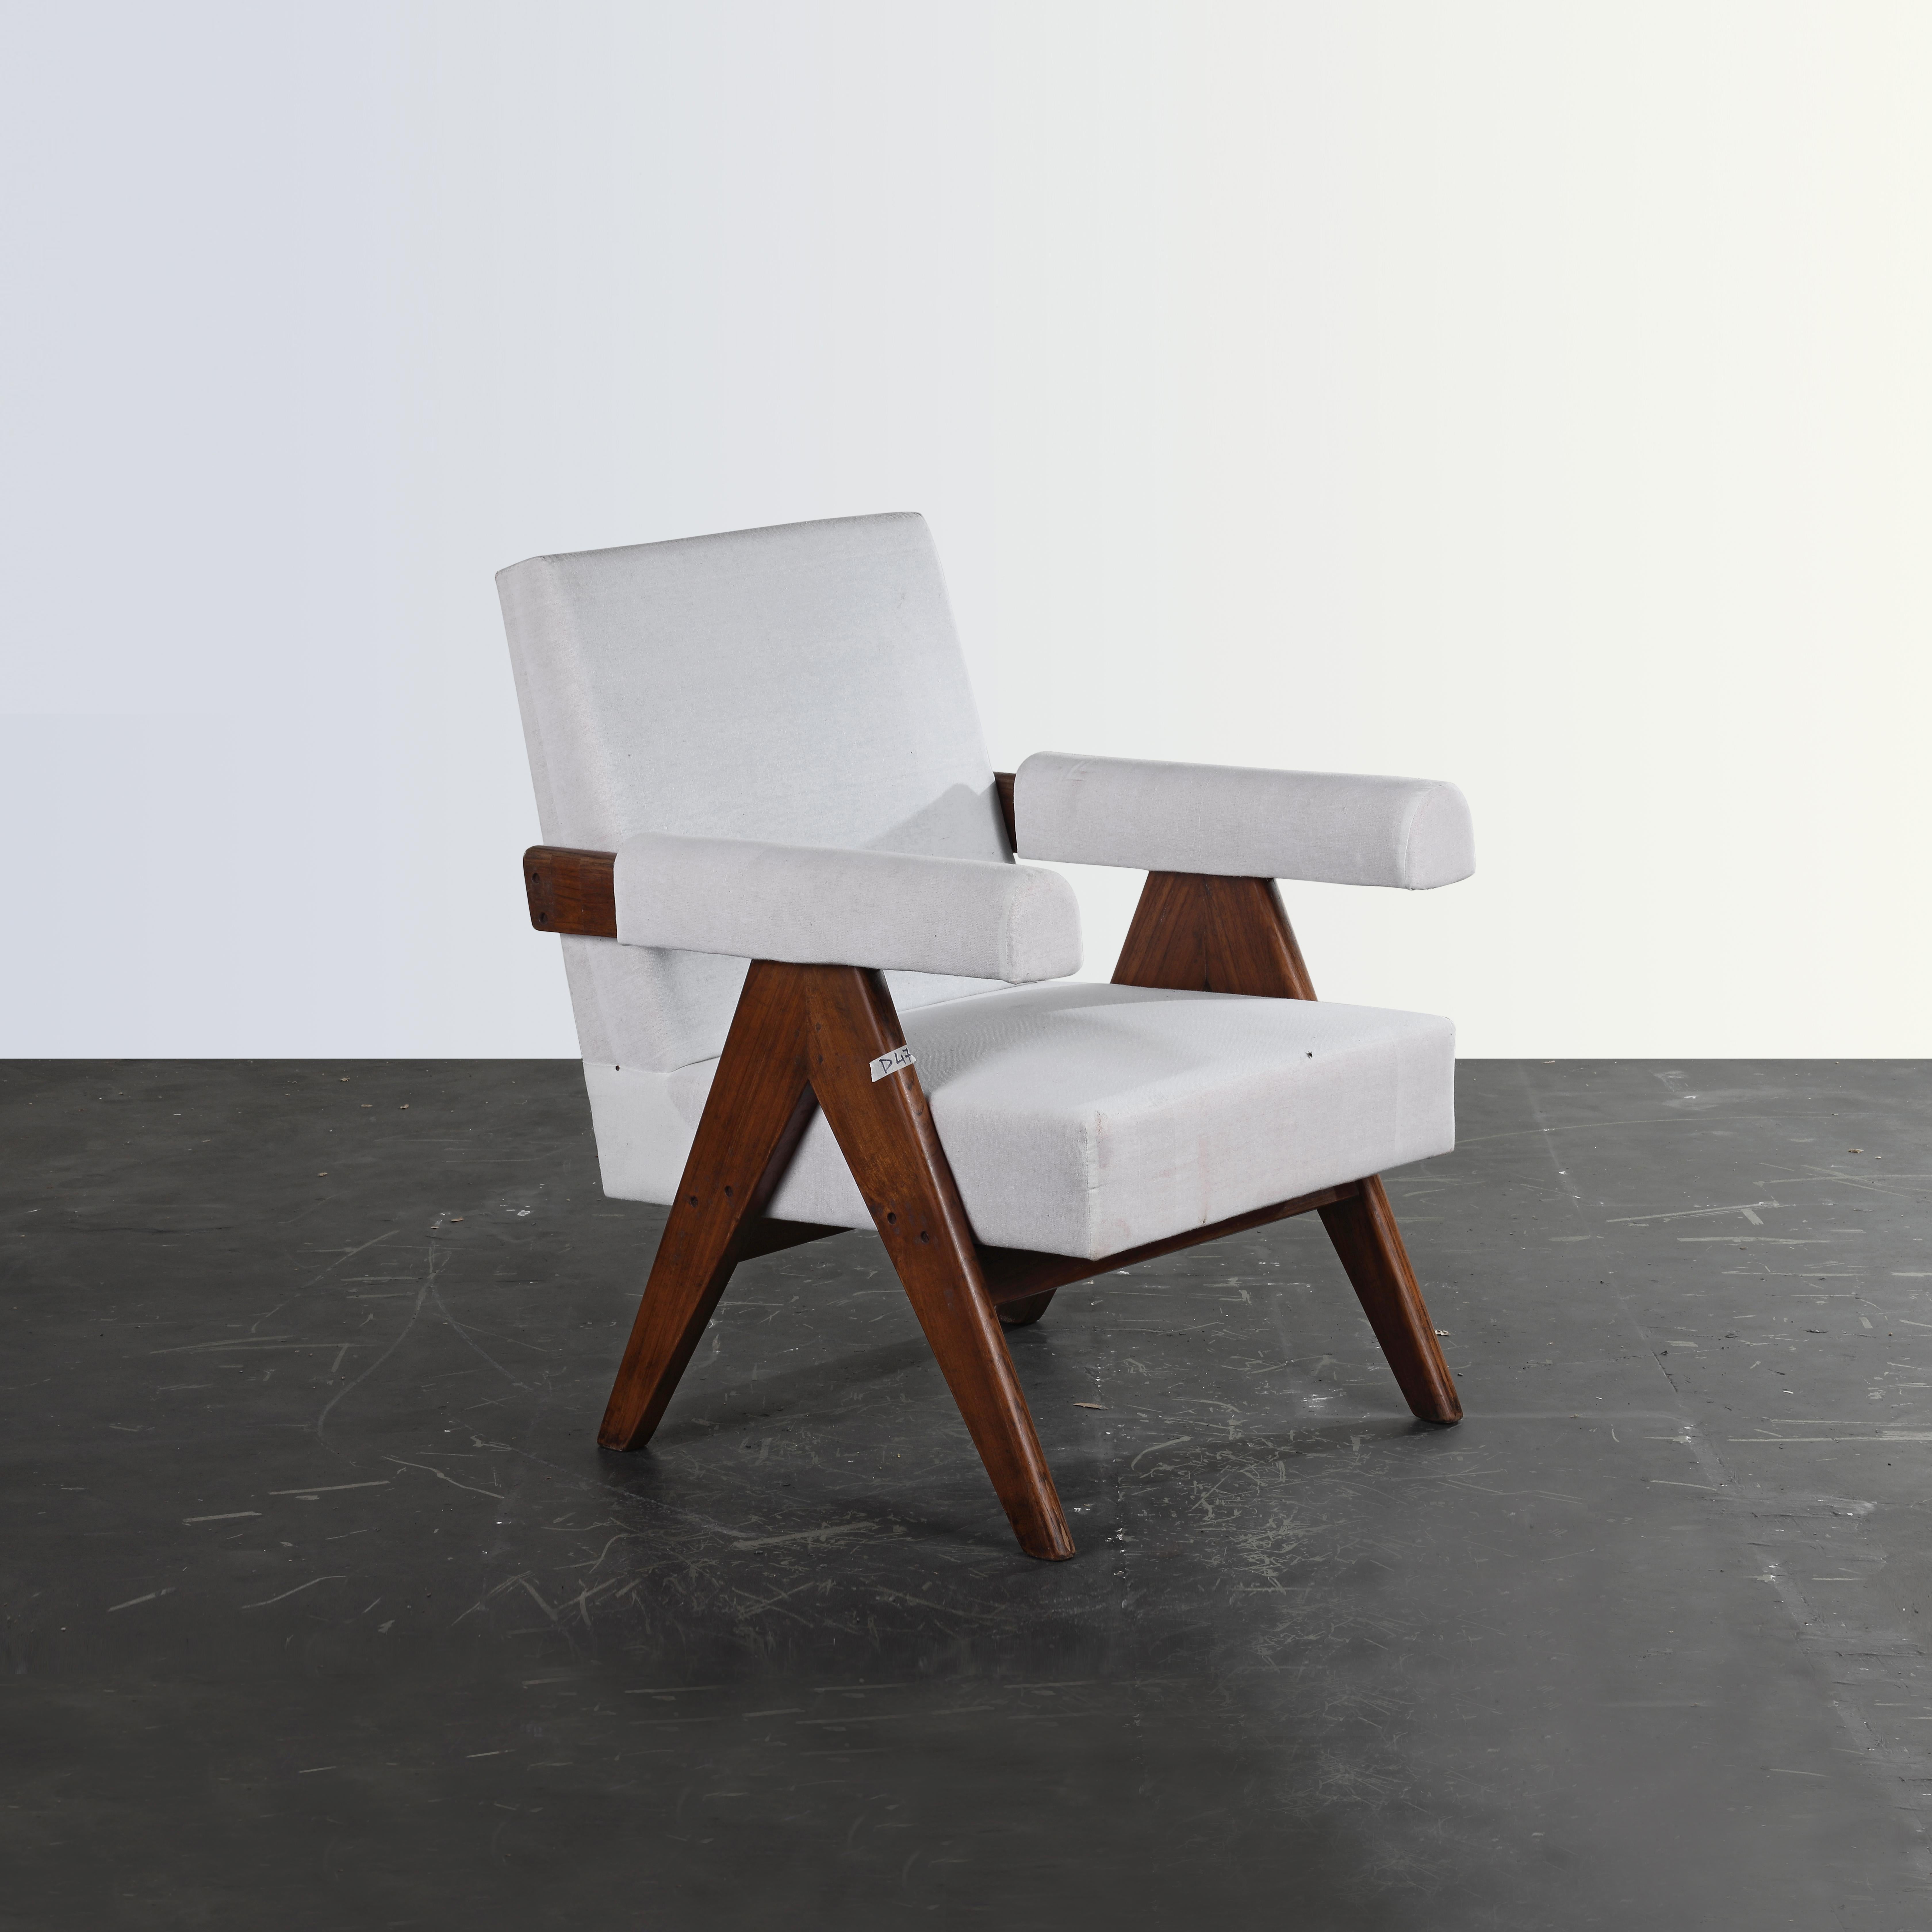 This iconic piece of furniture with its characteristic A-shaped profile is a rare classic of history. Through its sophisticated proportions and its elegant shape, the chair represents the timeless mindset of modernist architecture and design. It